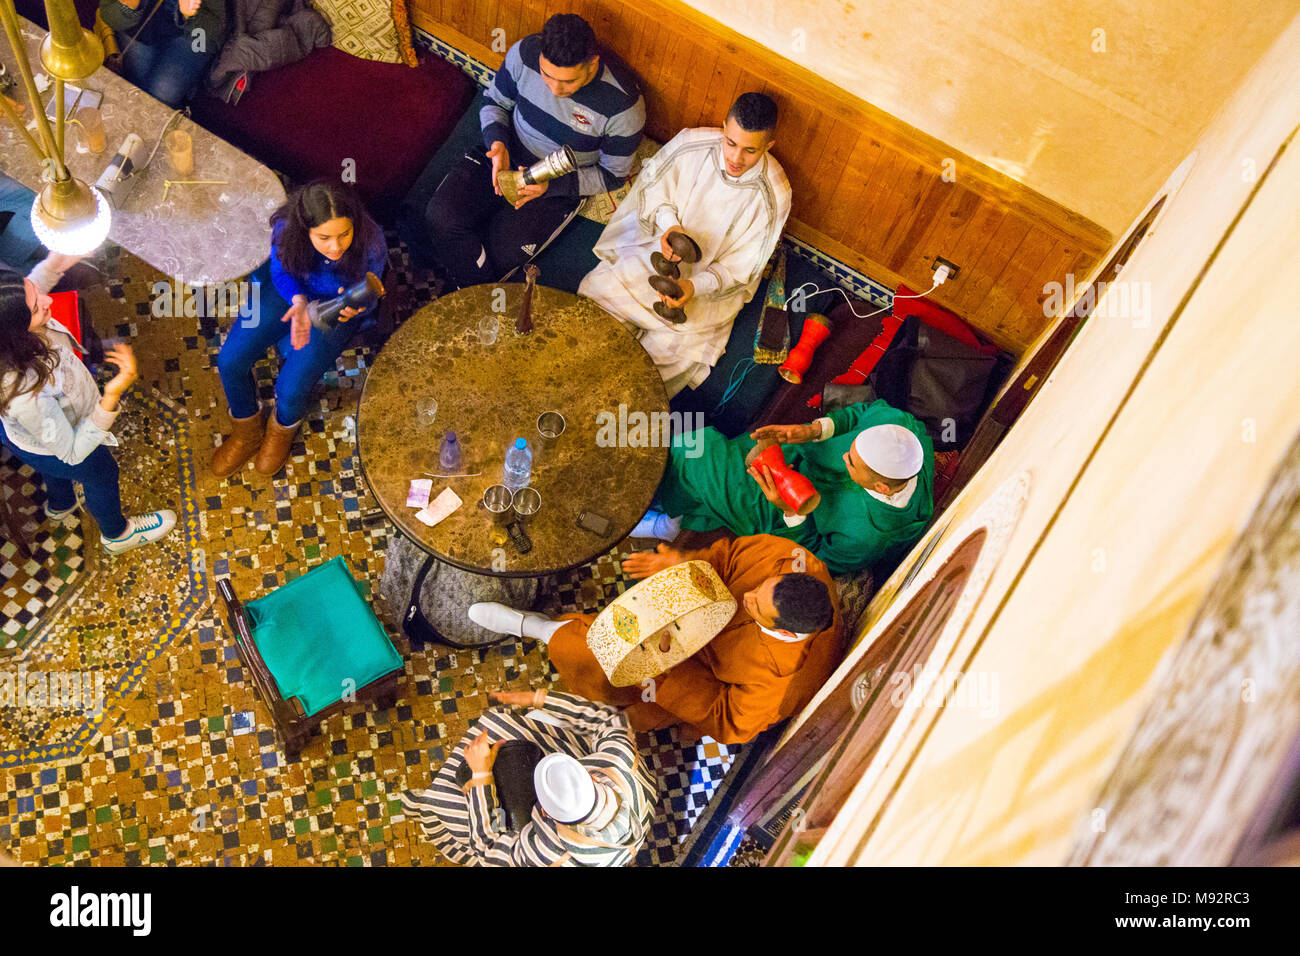 Musicians playing instruments at Cafe Clock in Fes, Morocco Stock Photo